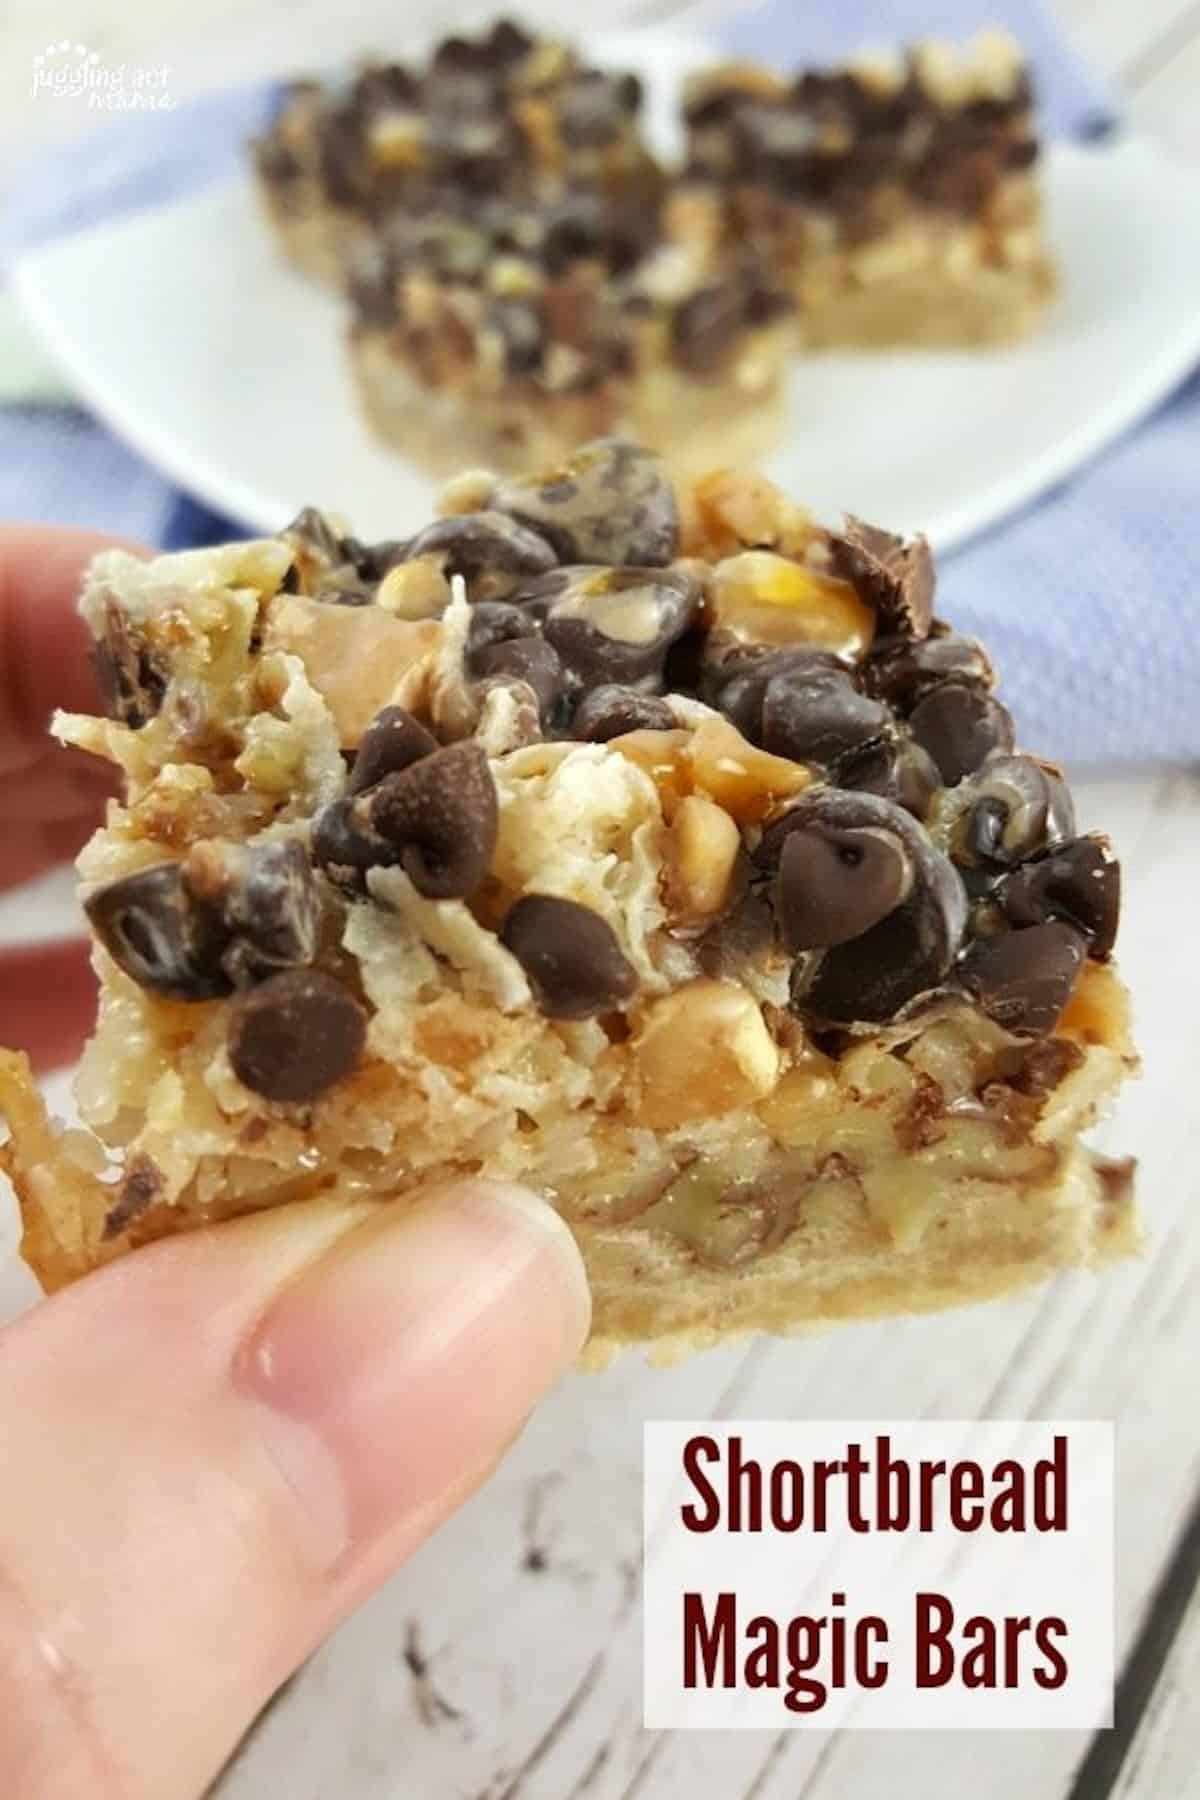 Sliced Magic Cookie Bars on a platter with a hand holding one of the bars. With print overlay for clarification.